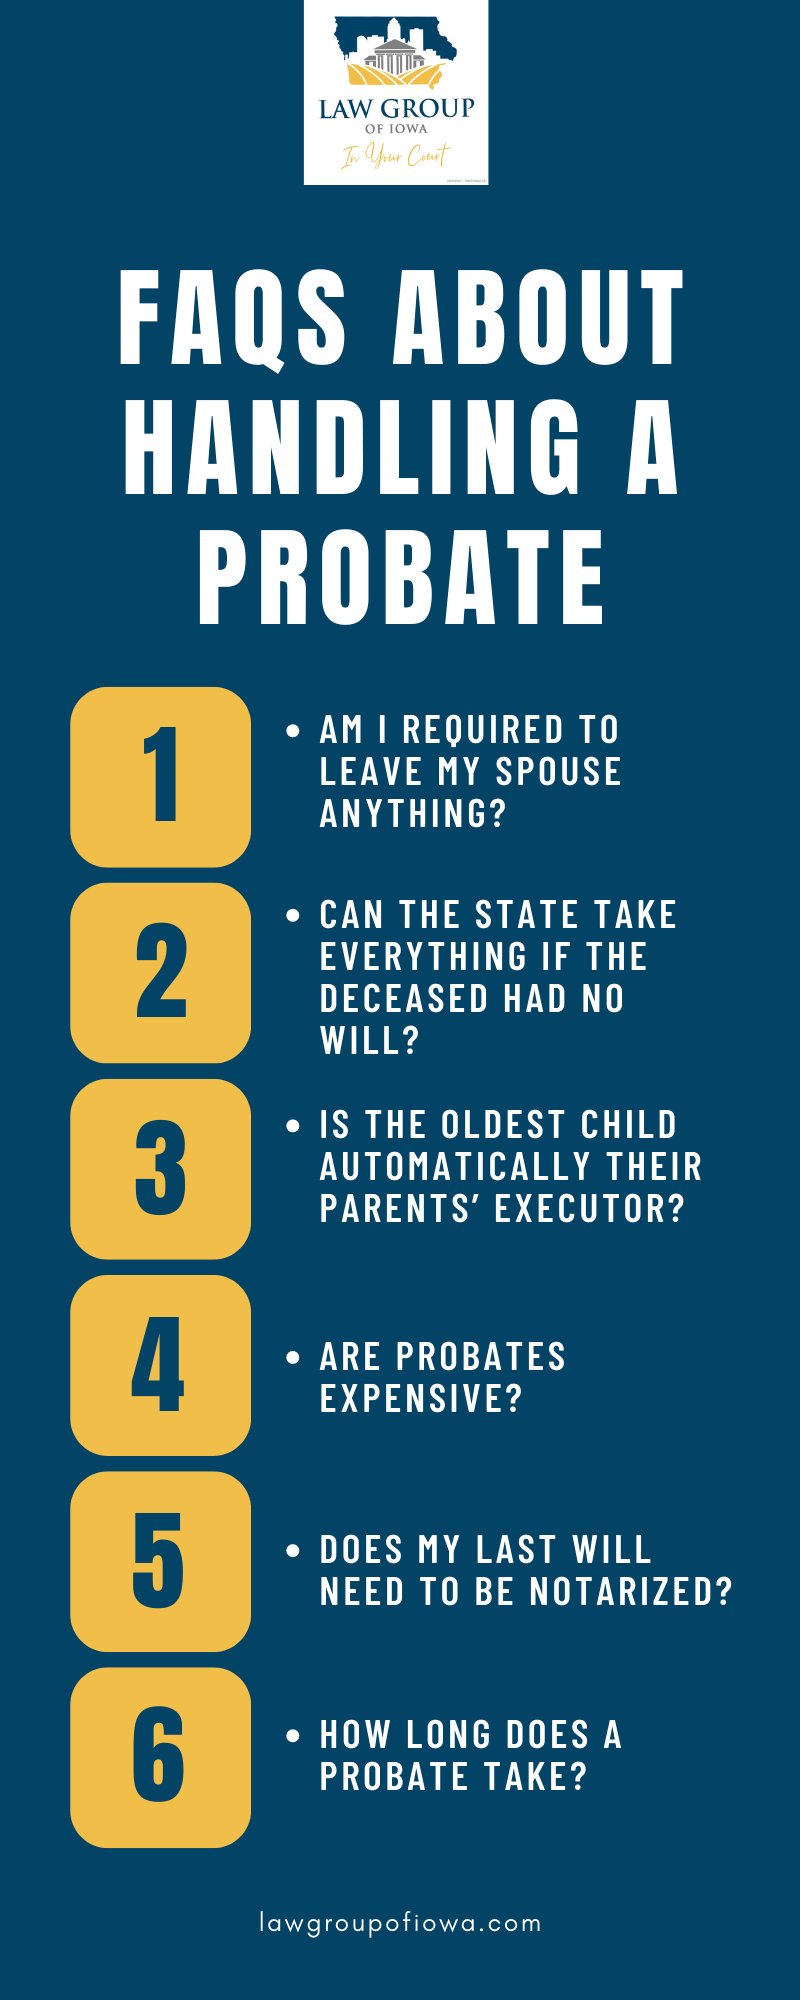 FAQs About Handling a Probate